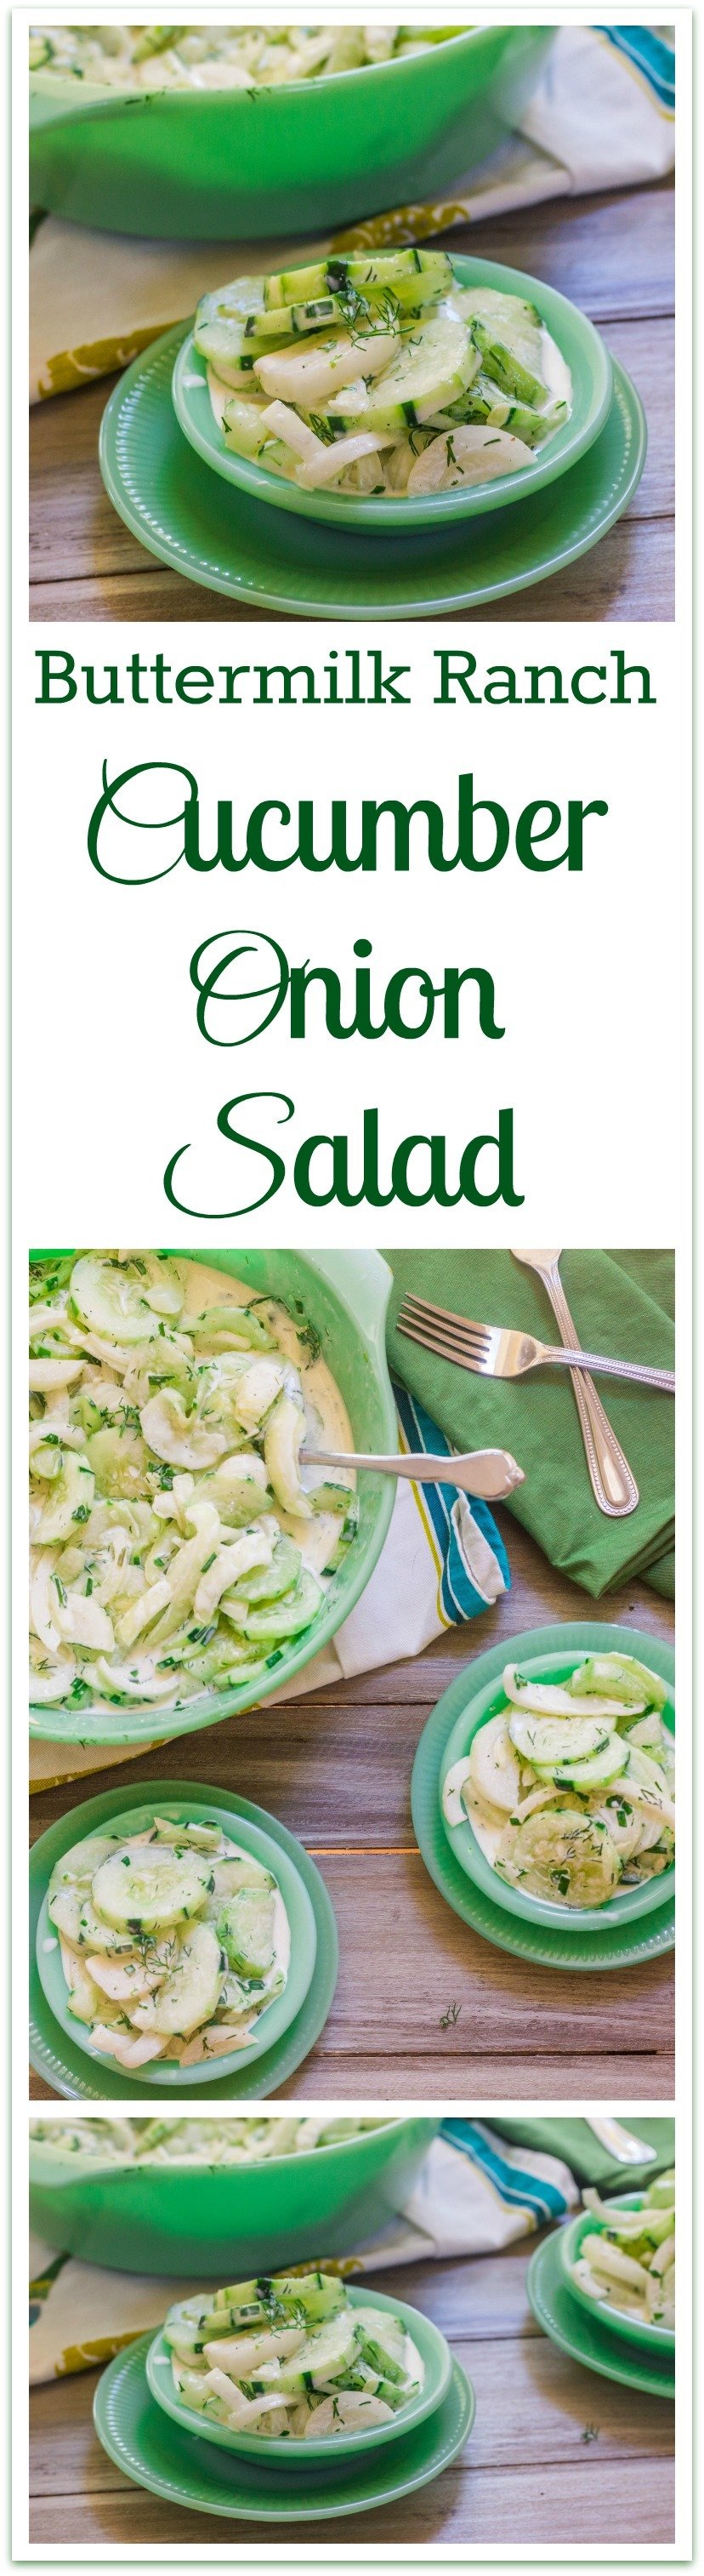 Cool and creamy Buttermilk Ranch Cucumber Onion Salad hits the spot and offers variation in our cucumber eating life. It's a cool and creamy Southern summer staple.  Oil and vinegar marinated cucumbers and onions are a popular side dish, too. #CucumberSalad #OnionSalad #Buttermilk